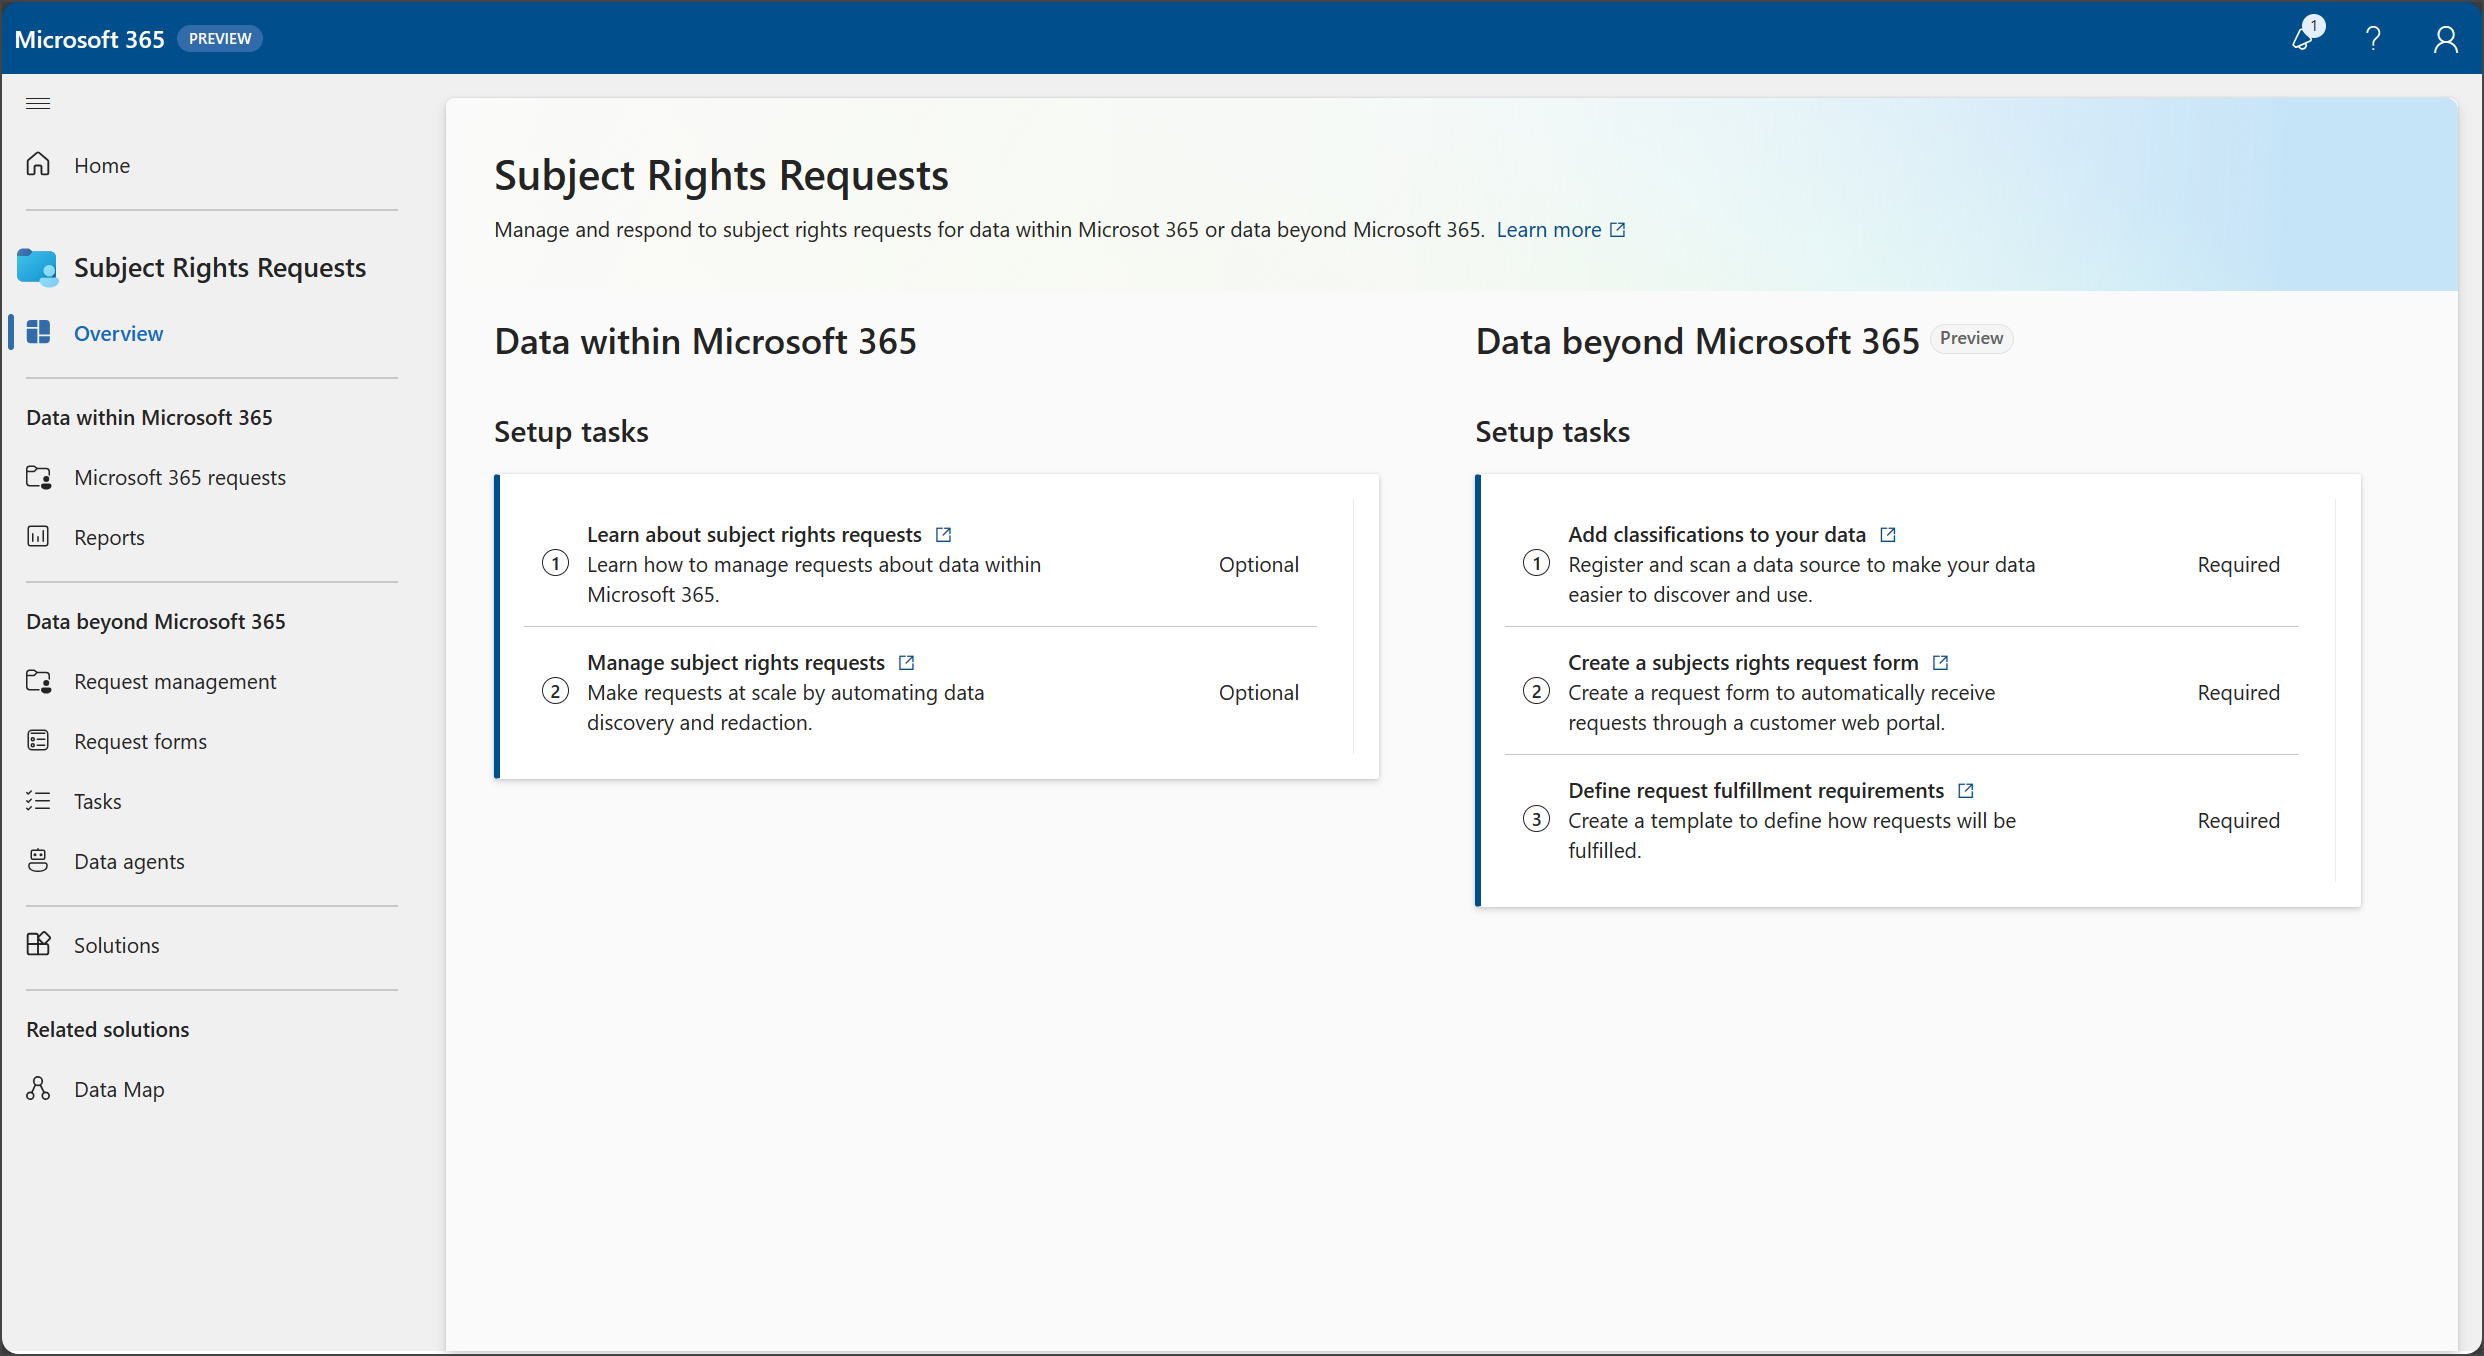 Screenshot of the subject rights requests overview page in the Priva portal.